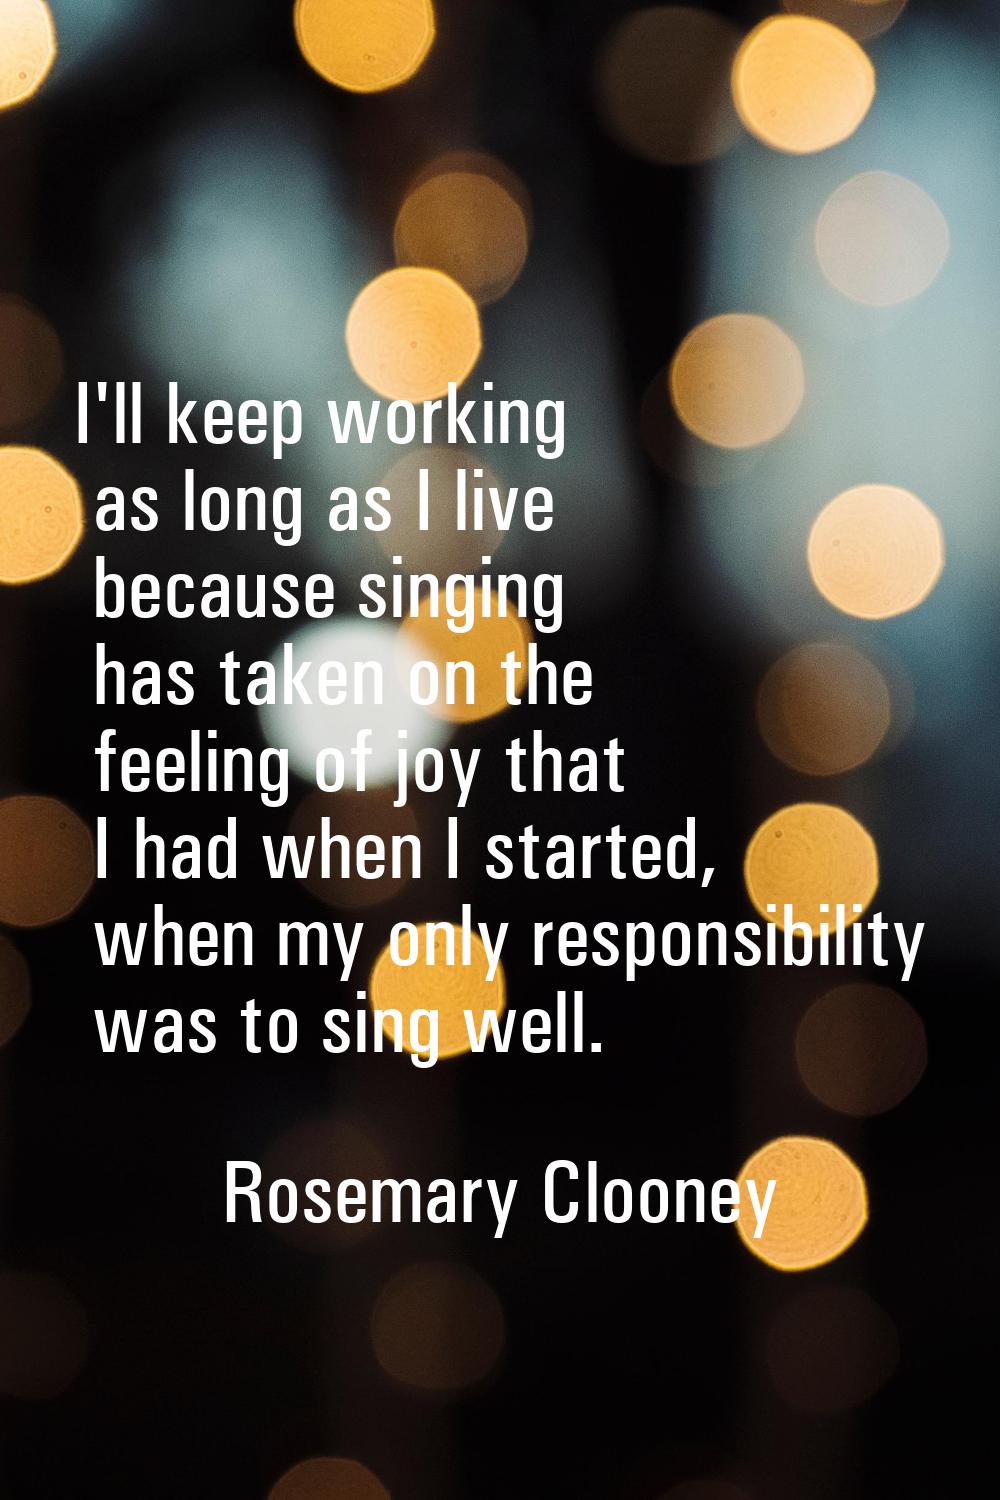 I'll keep working as long as I live because singing has taken on the feeling of joy that I had when